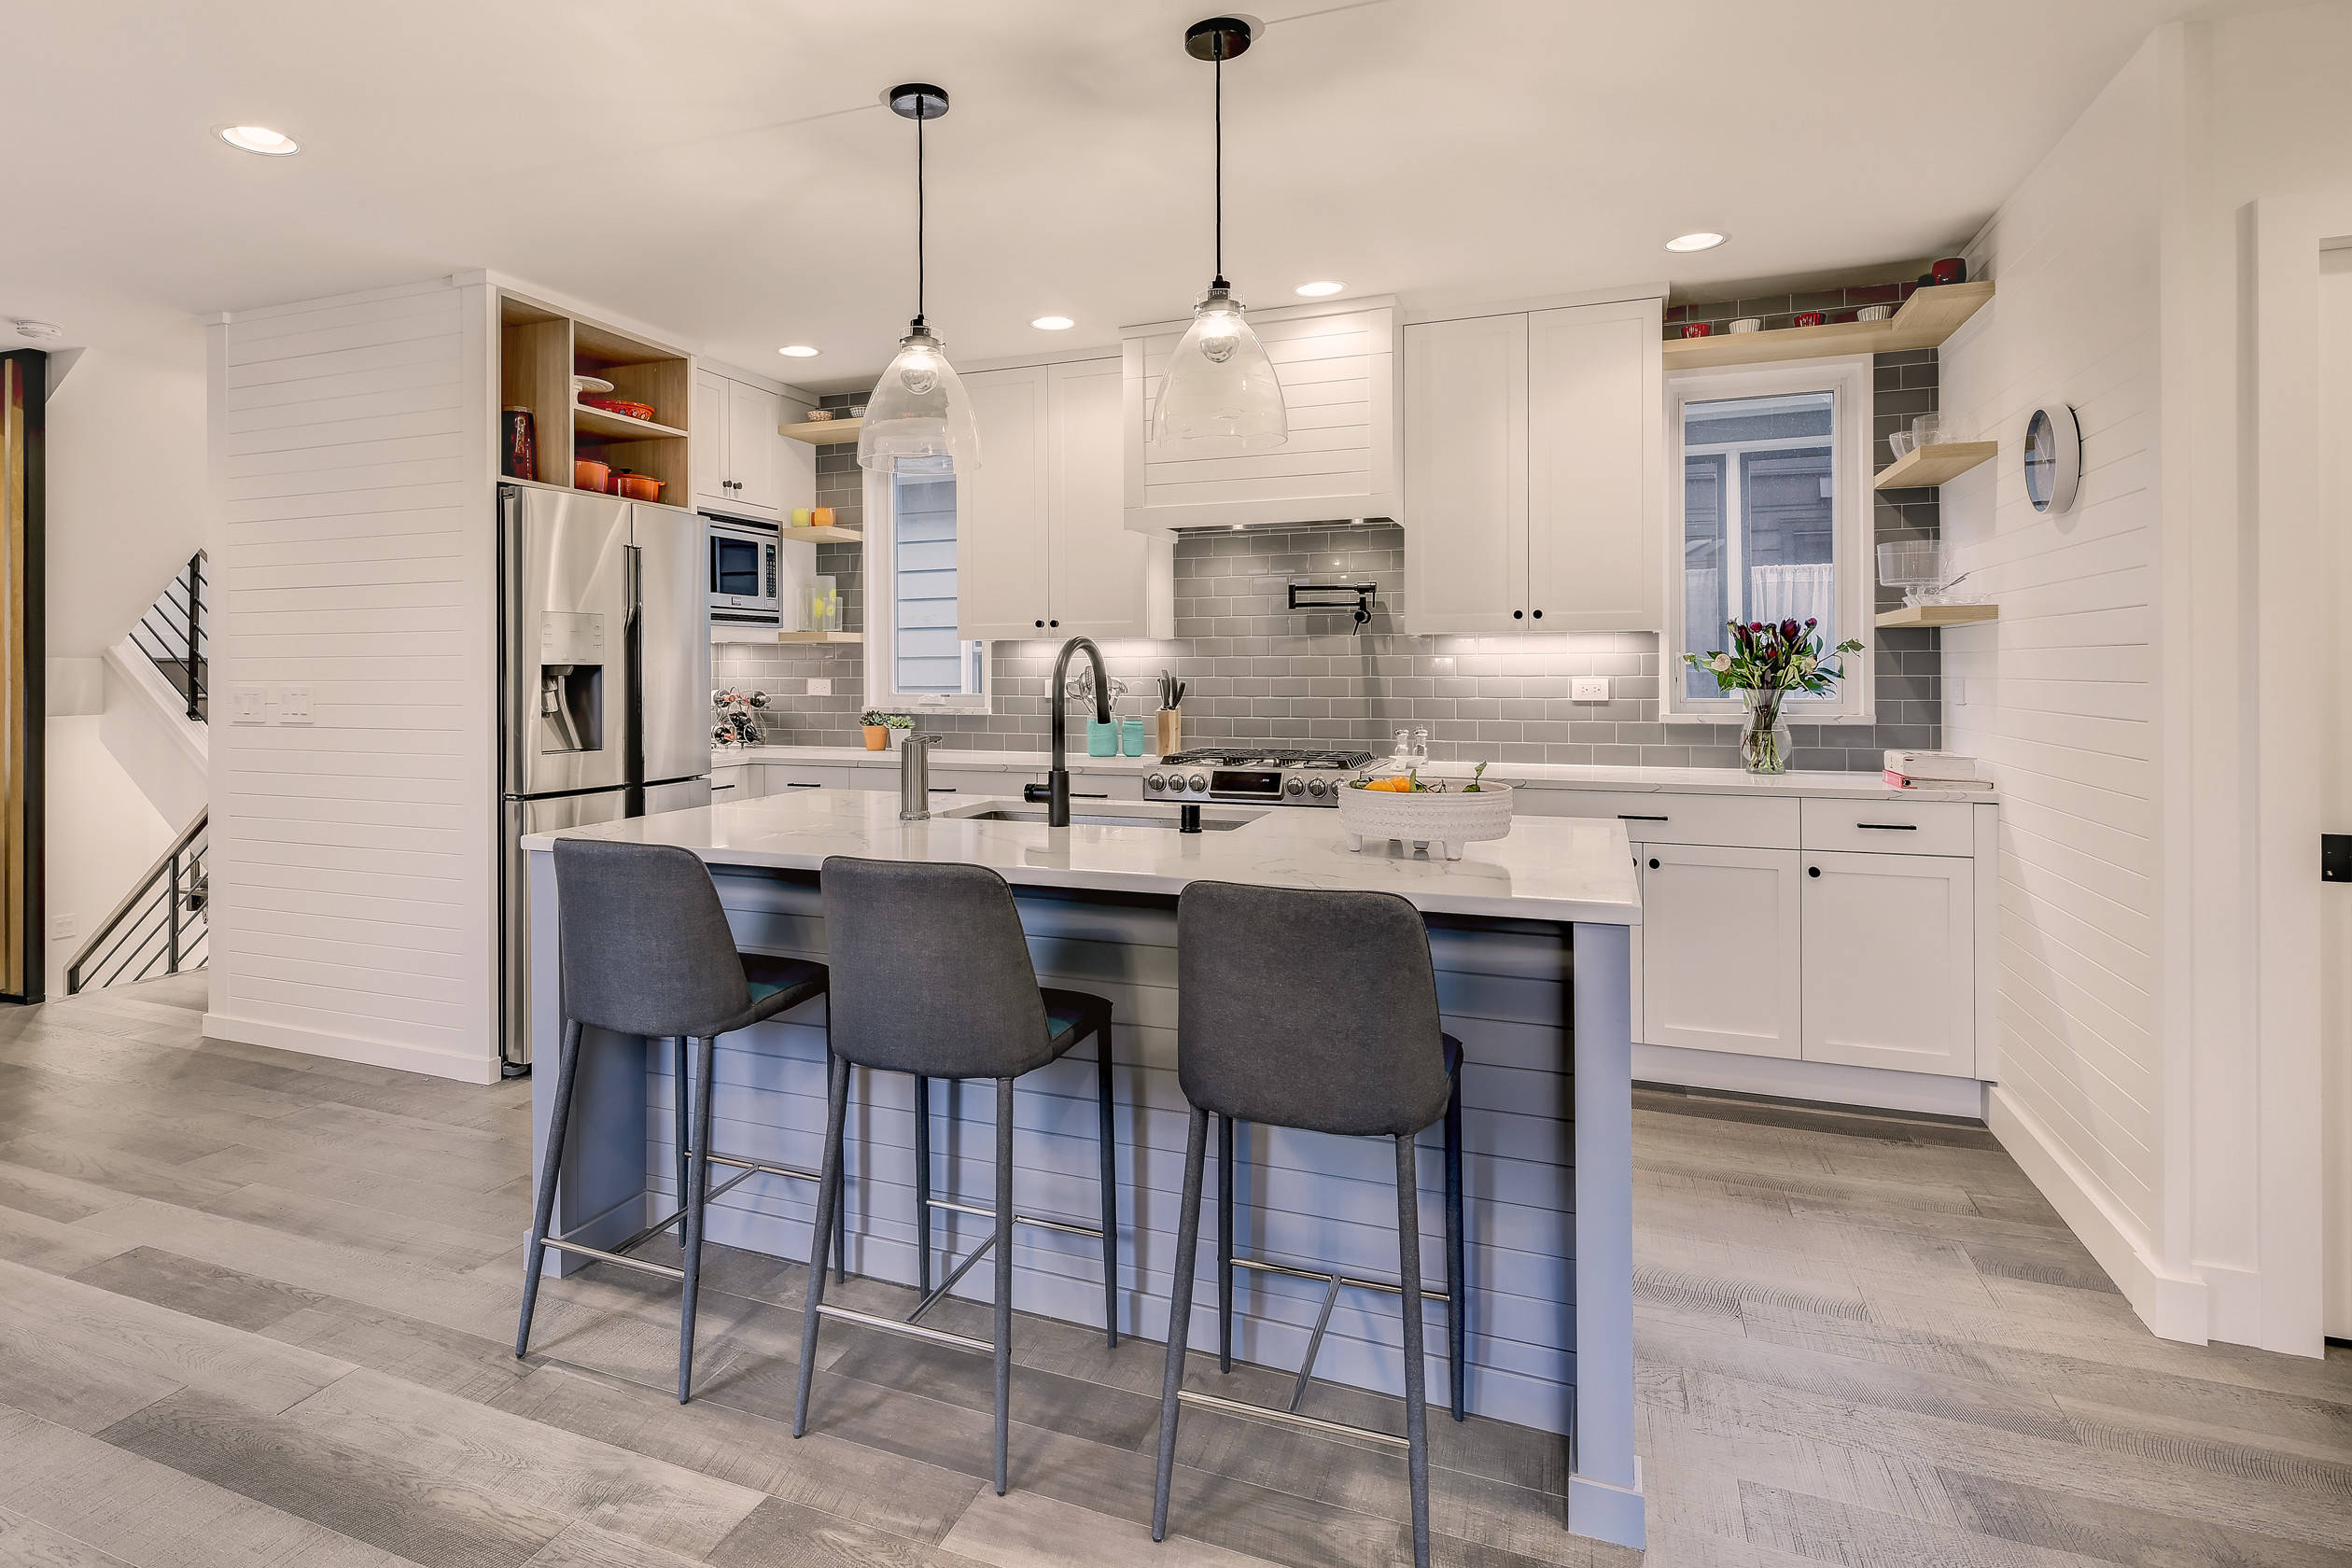 75 Beautiful Small Open Concept Kitchen Pictures Ideas September 2021 Houzz